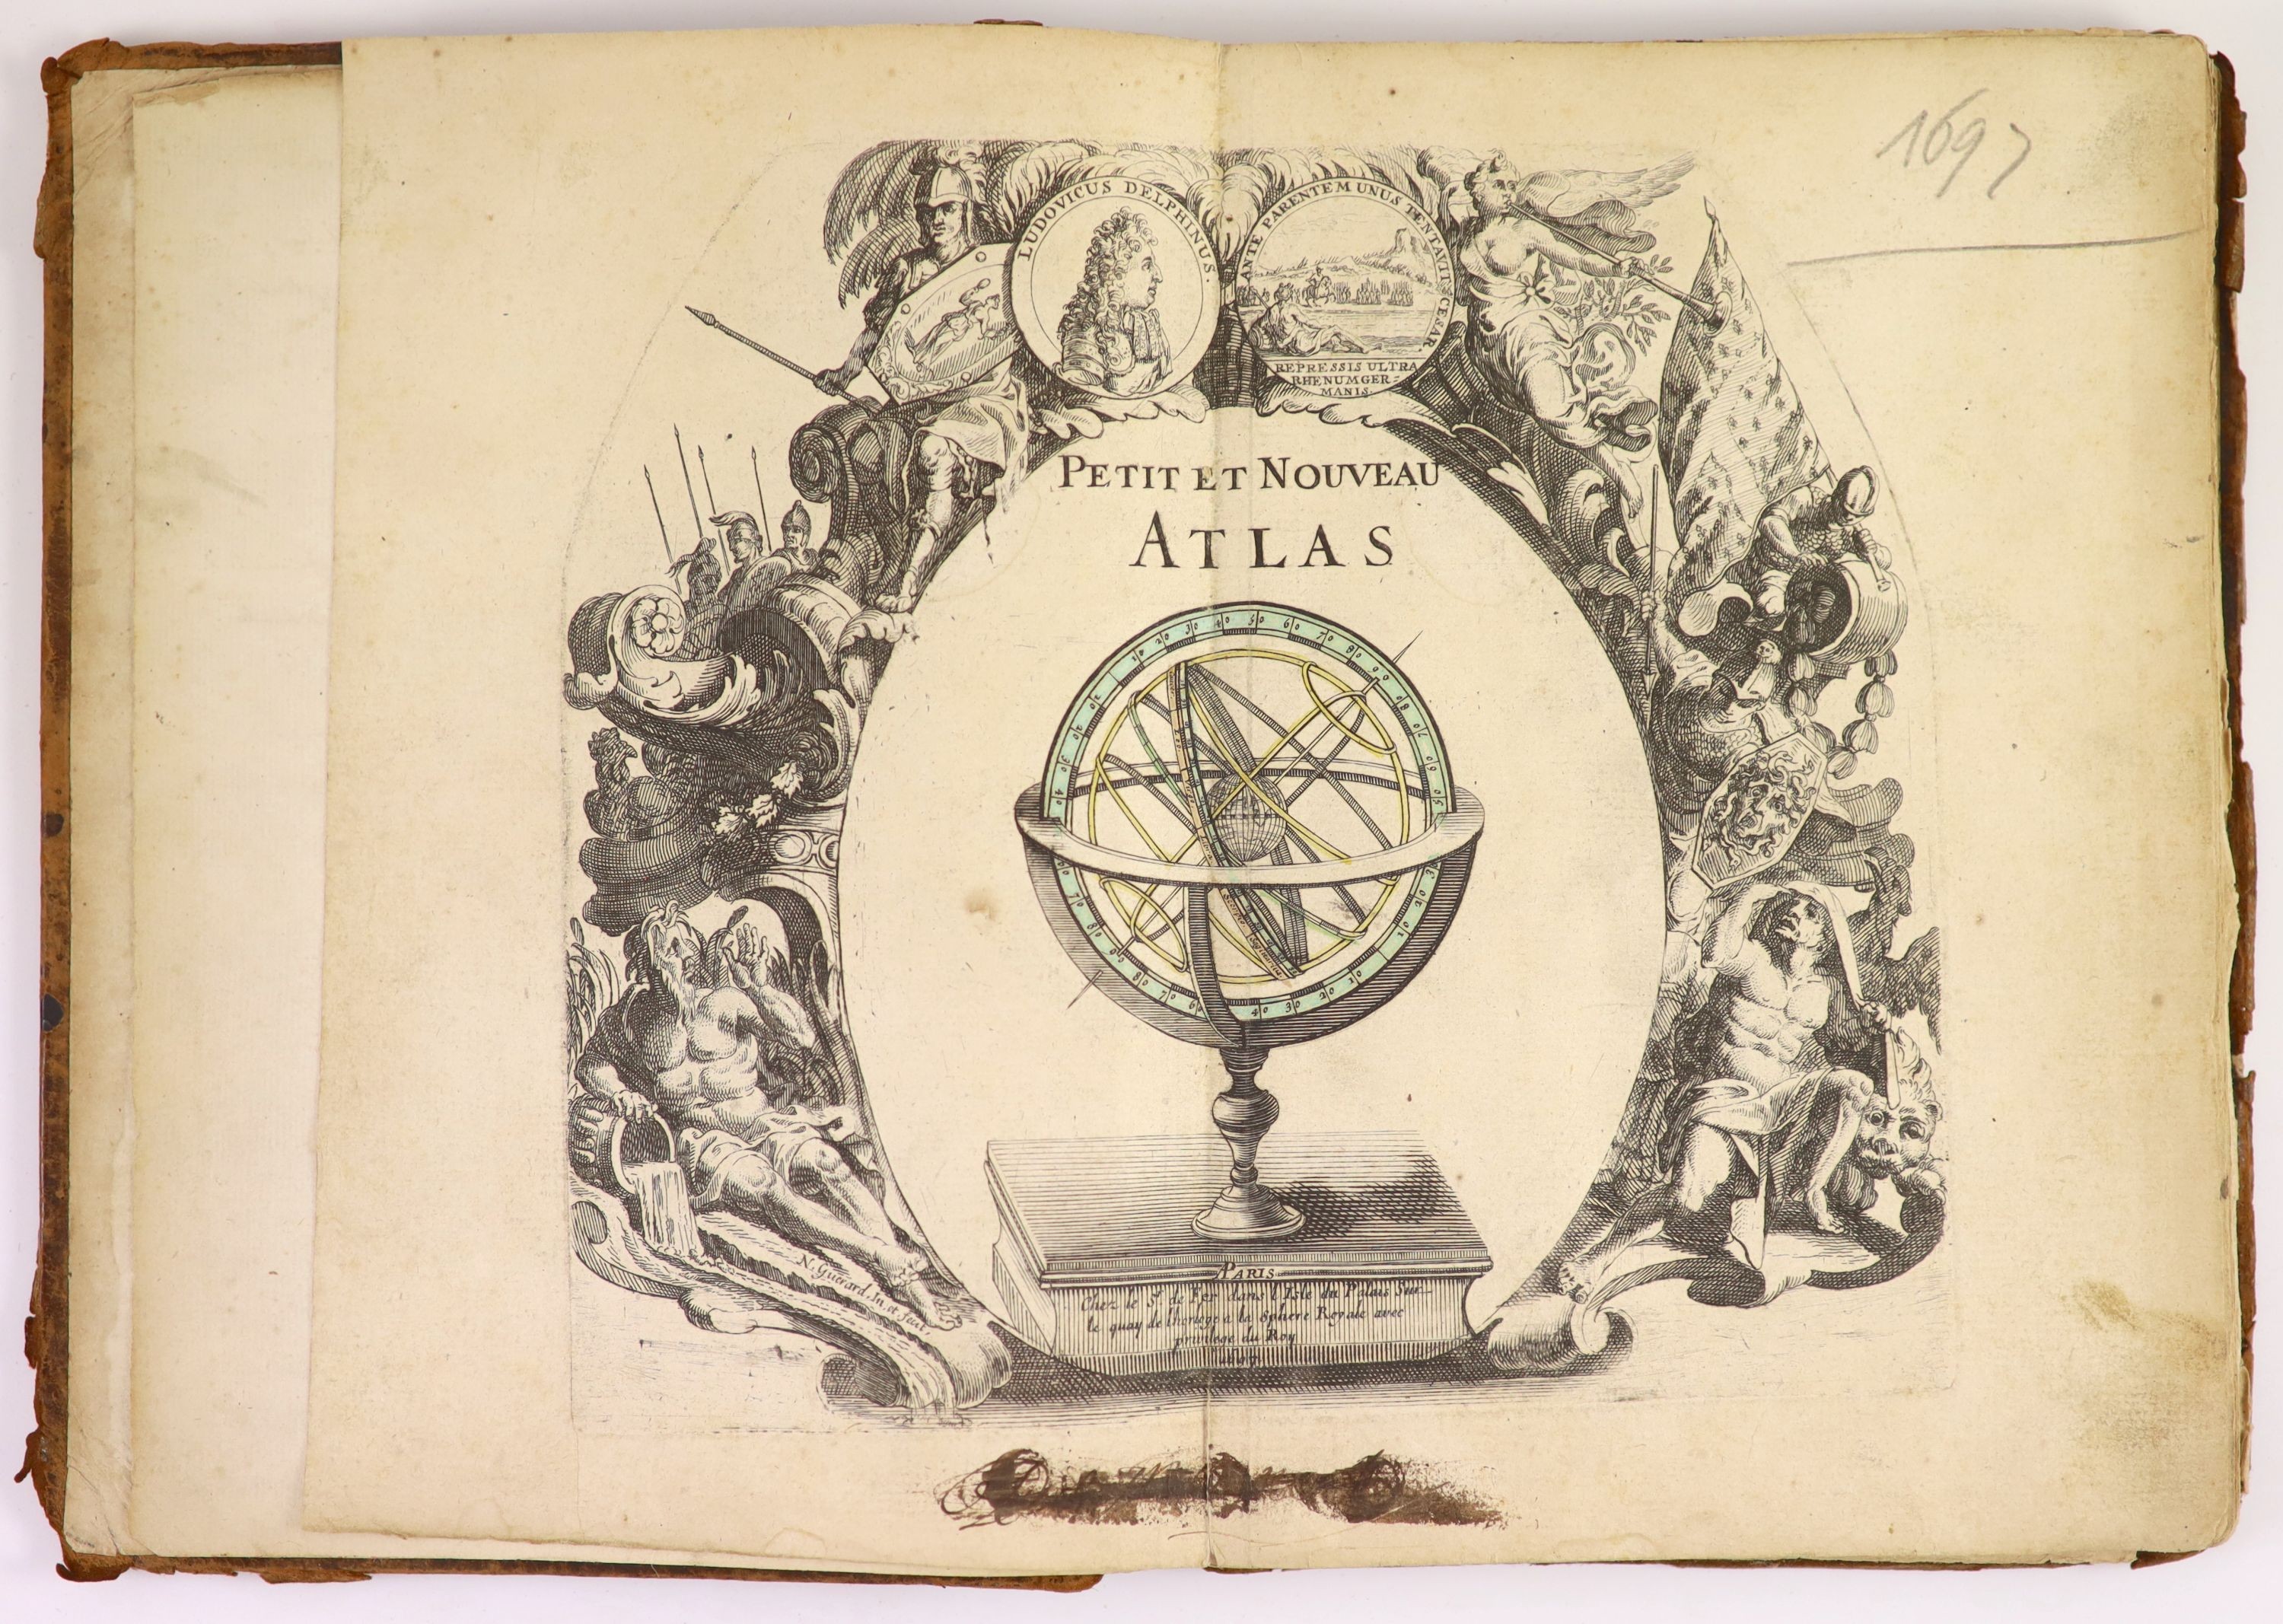 Fer, Nicholas de - Petit et Nouveau Atlas, 1st edition, oblong qto, original calf, title with armillary sphere and 19 double page mapsheets, all hand-coloured in outline, including North America, with California shown as